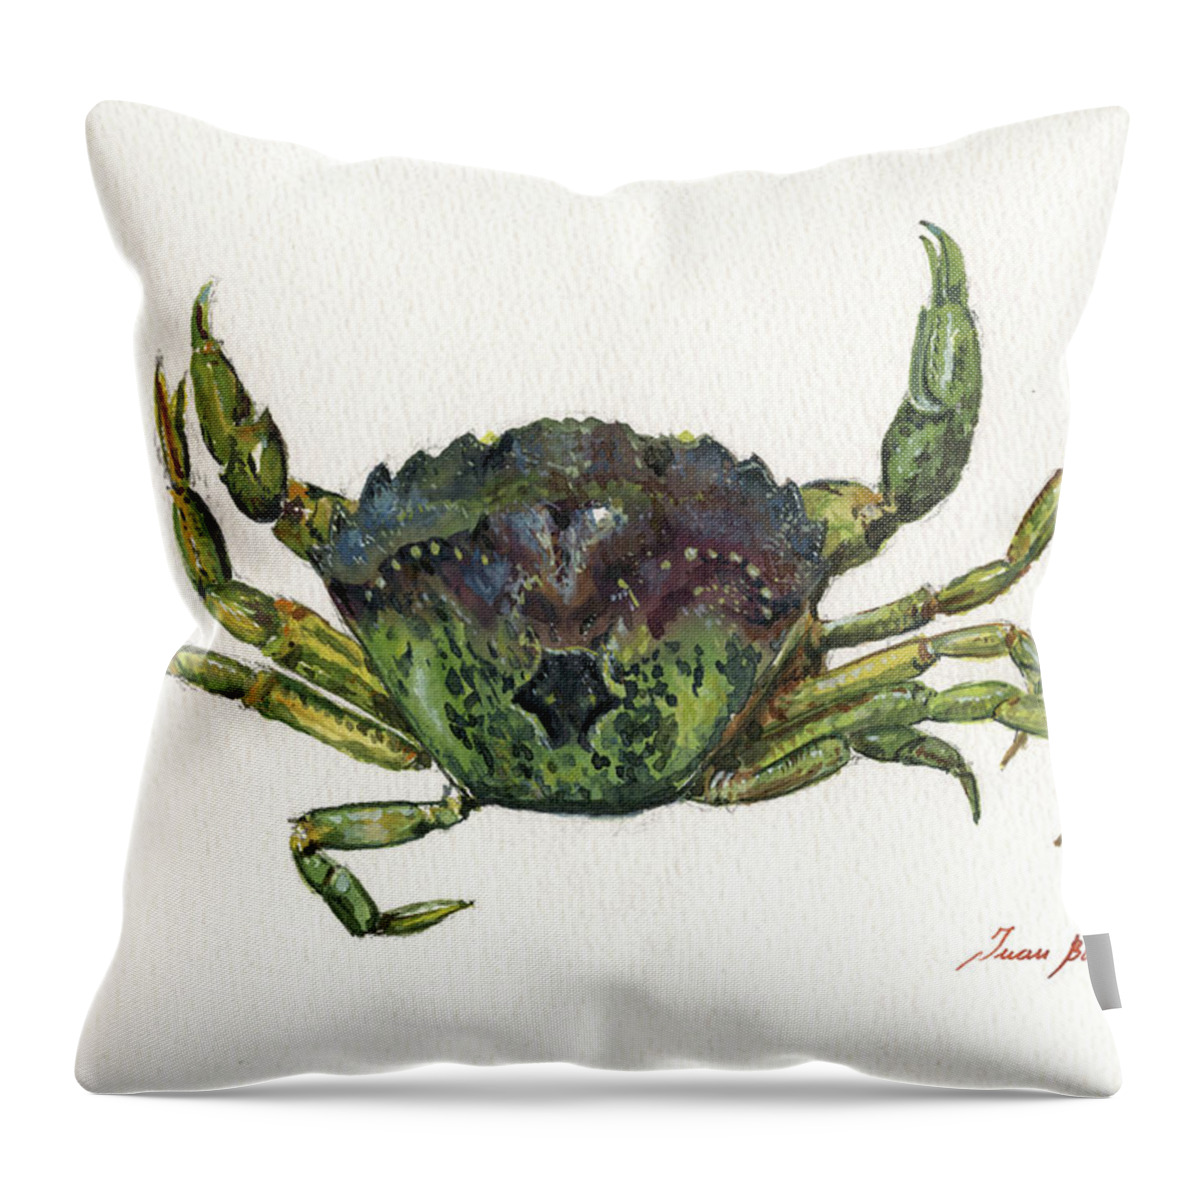 Shore Green Crab Art Throw Pillow featuring the painting Shore green crab by Juan Bosco